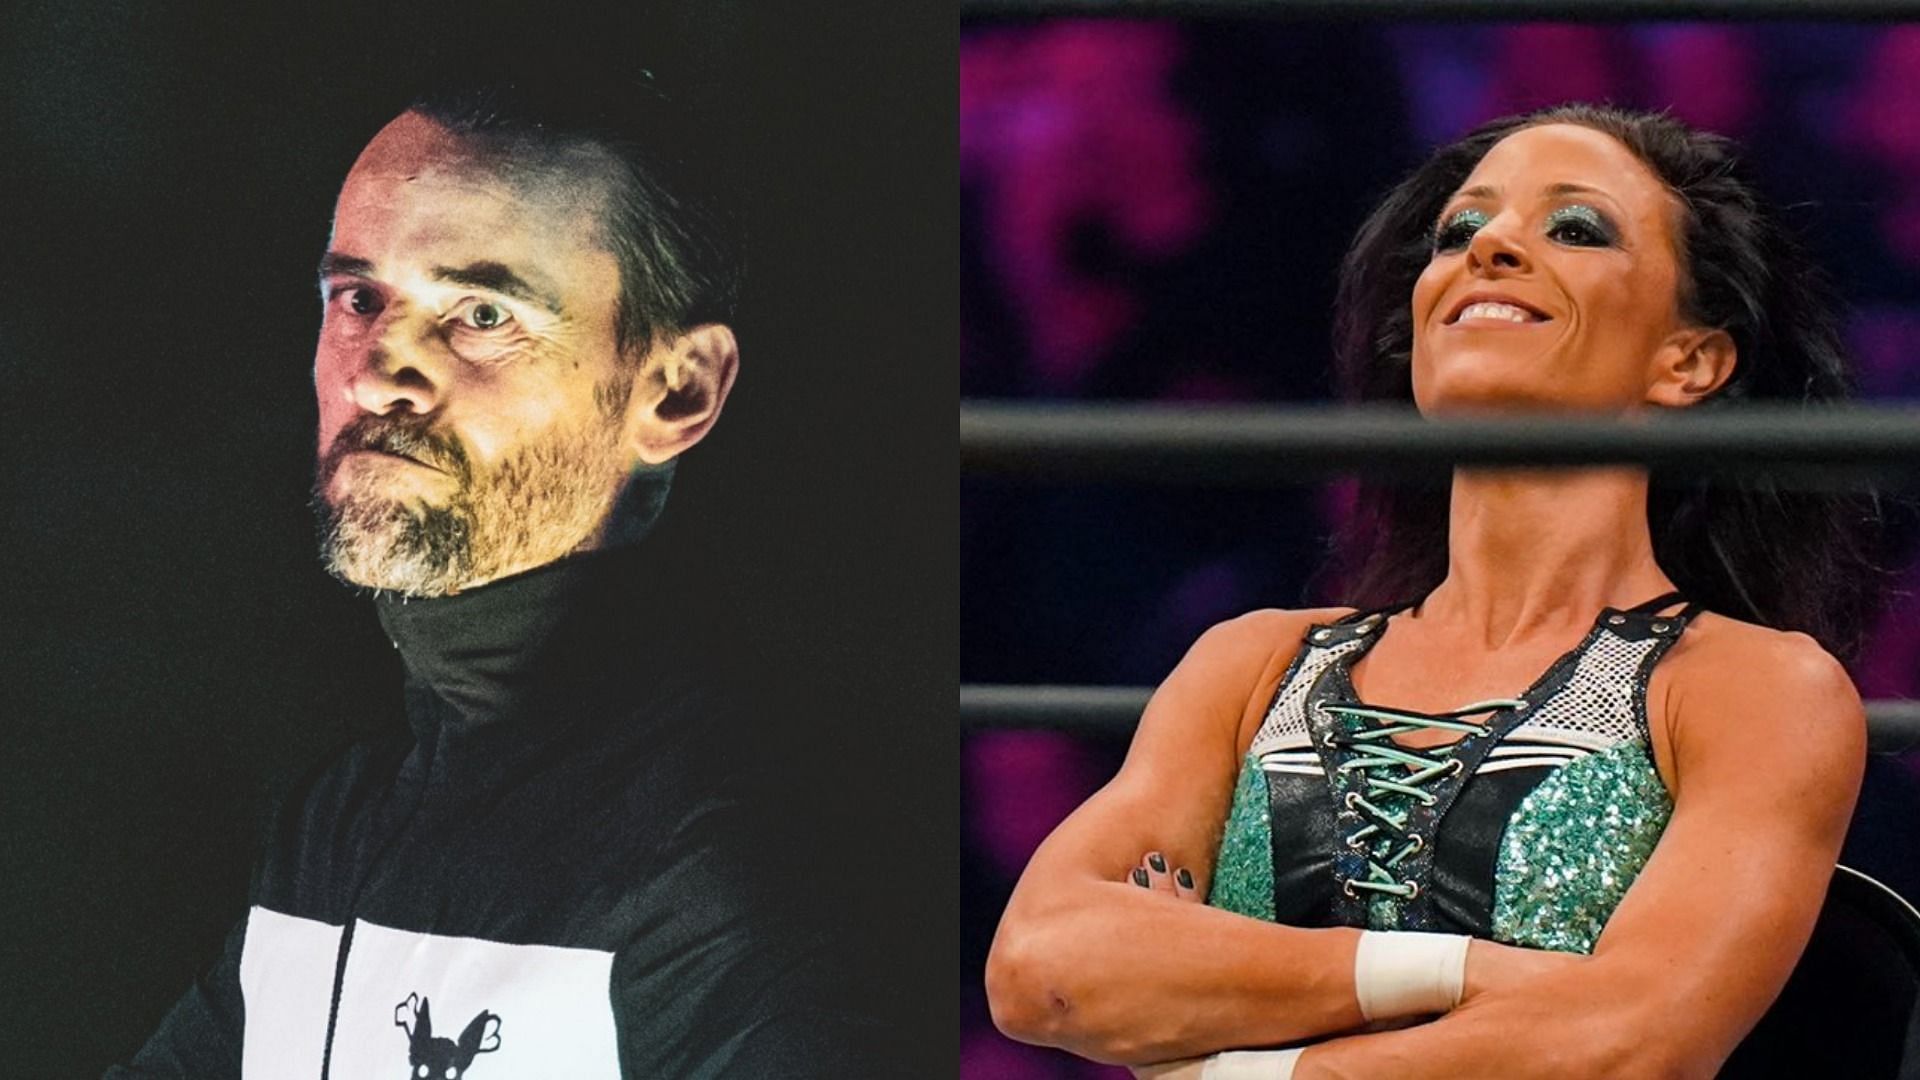 CM Punk and Serena Deeb have known each other for a long time.